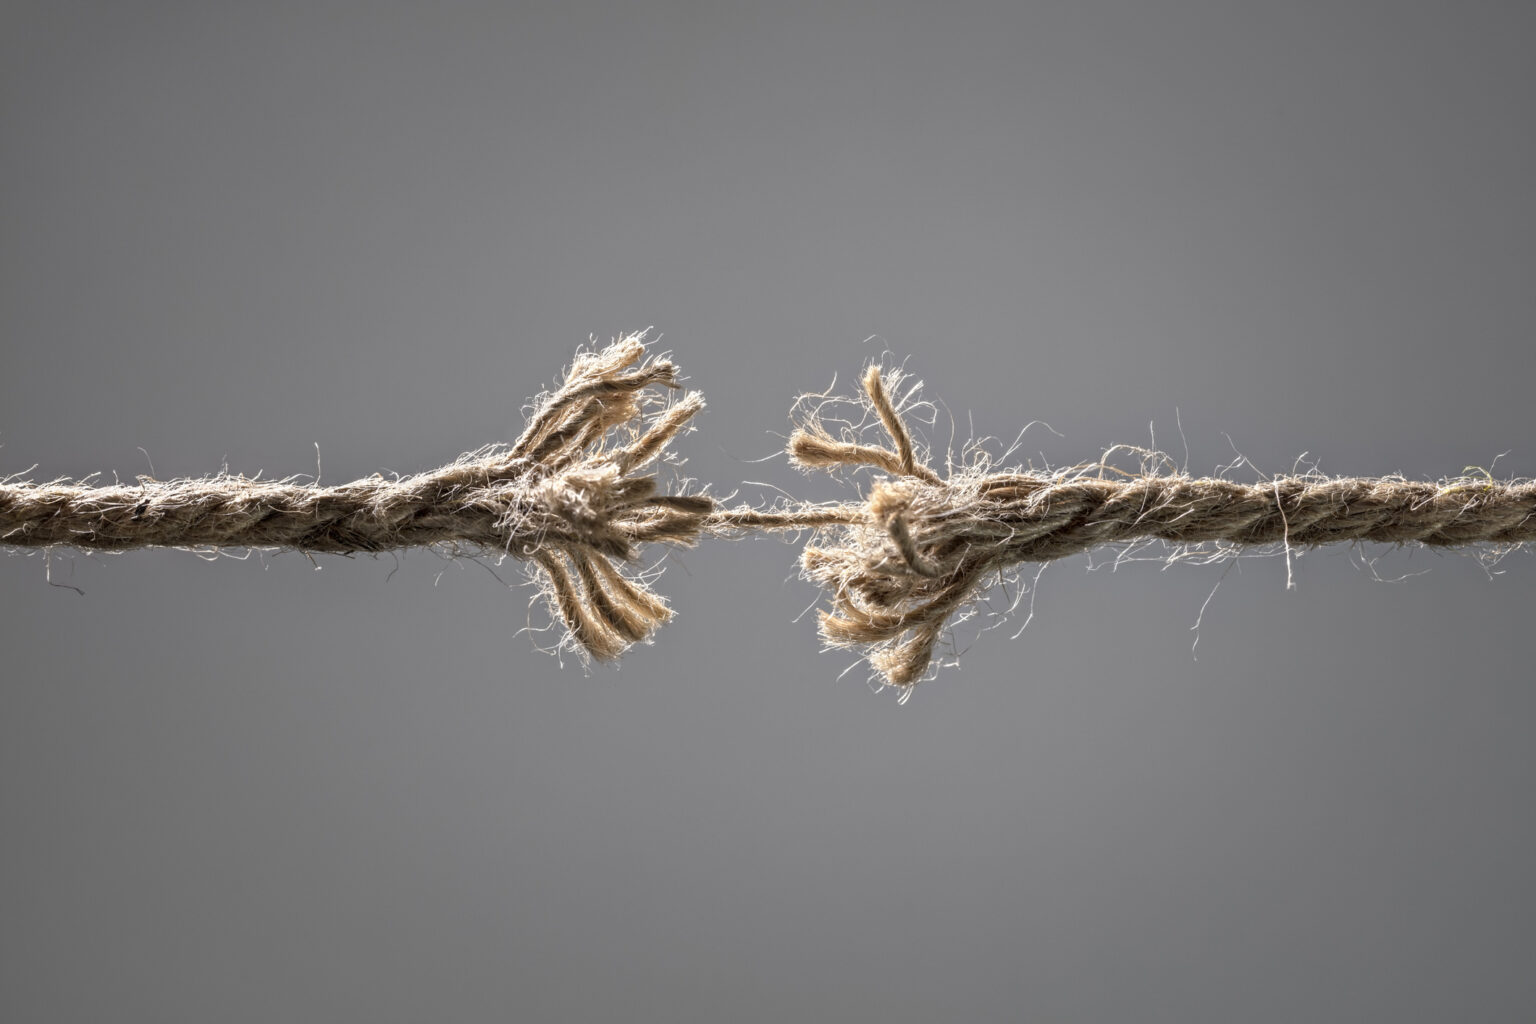 Image shows a frayed piece of rope about to break